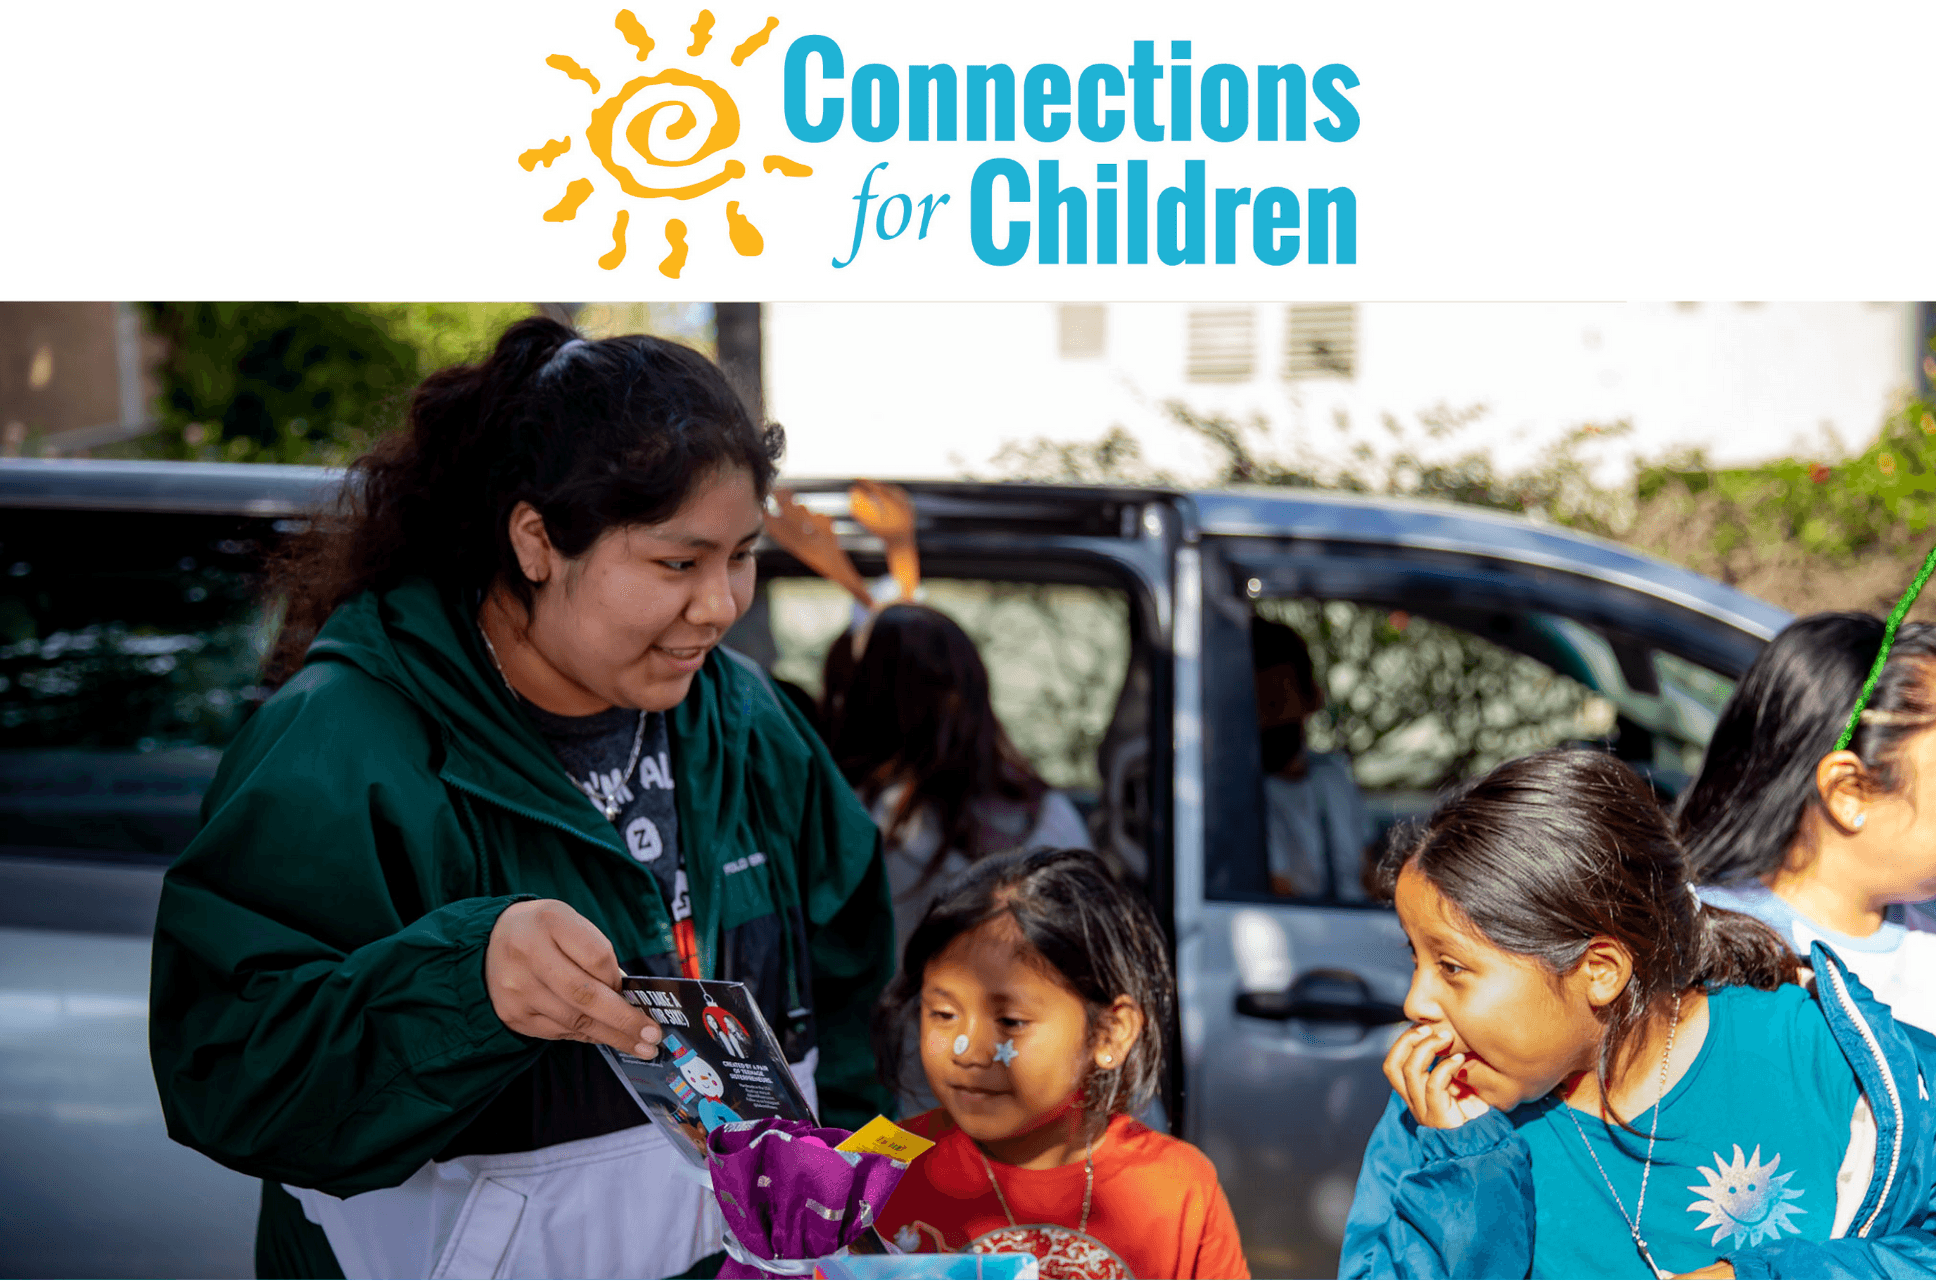 Donate today and make a positive impact in the lives of children and families!